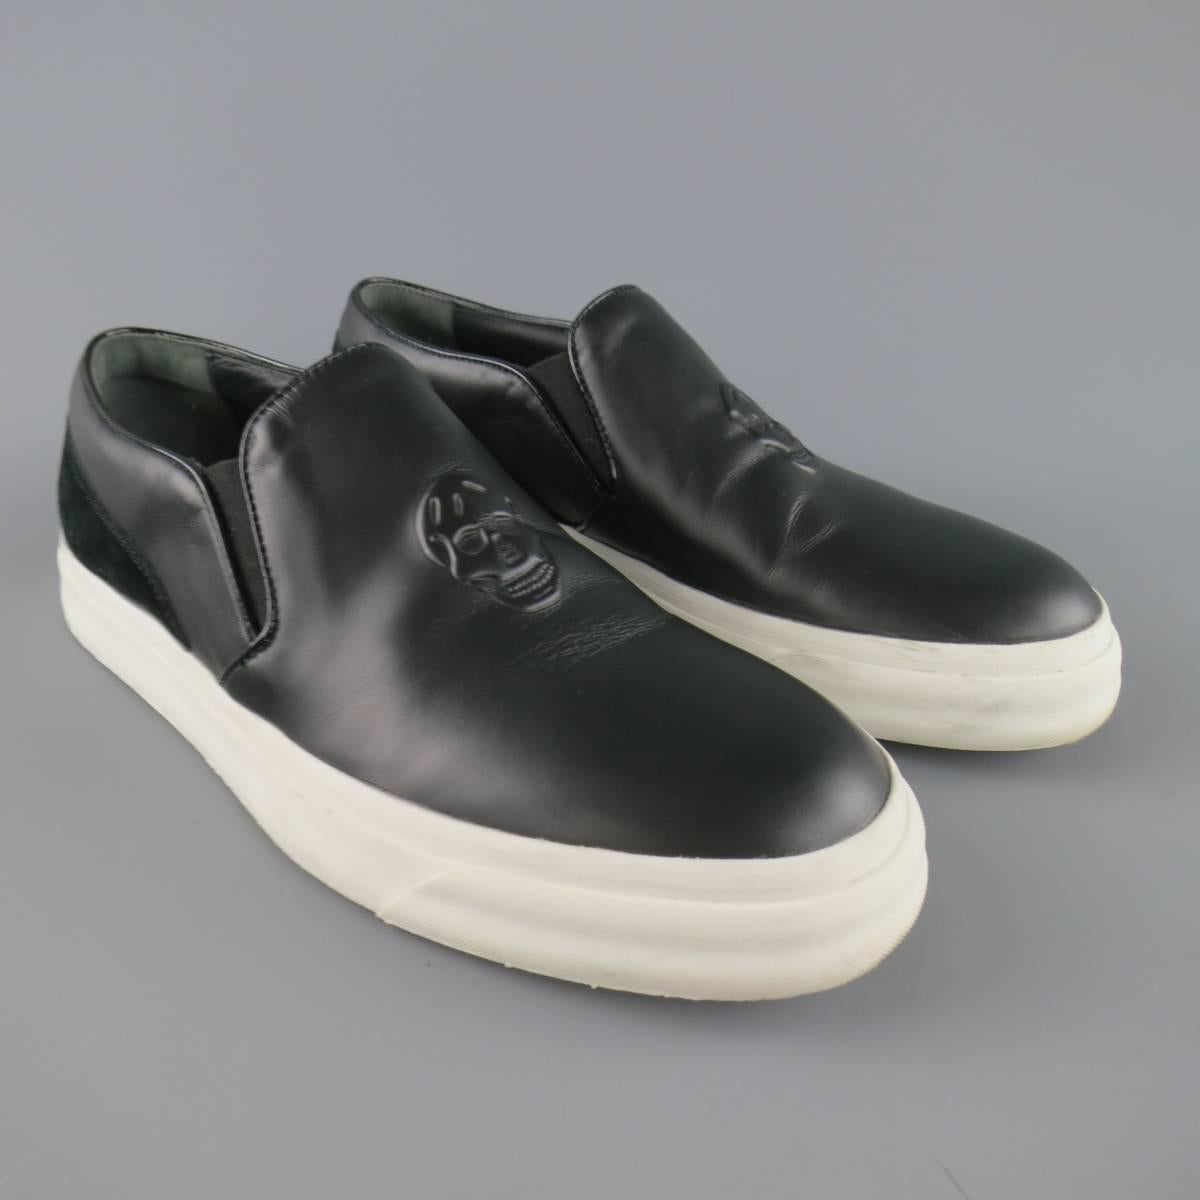 ALEXANDER MCQUEEN slip on sneakers come in smooth black leather and feature patent leather piping, embossed skull logo, embroidered suede back panel, and thick white rubber sole. With box. Made in Italy.
 
Good Pre-Owned Condition.
Marked: 42
